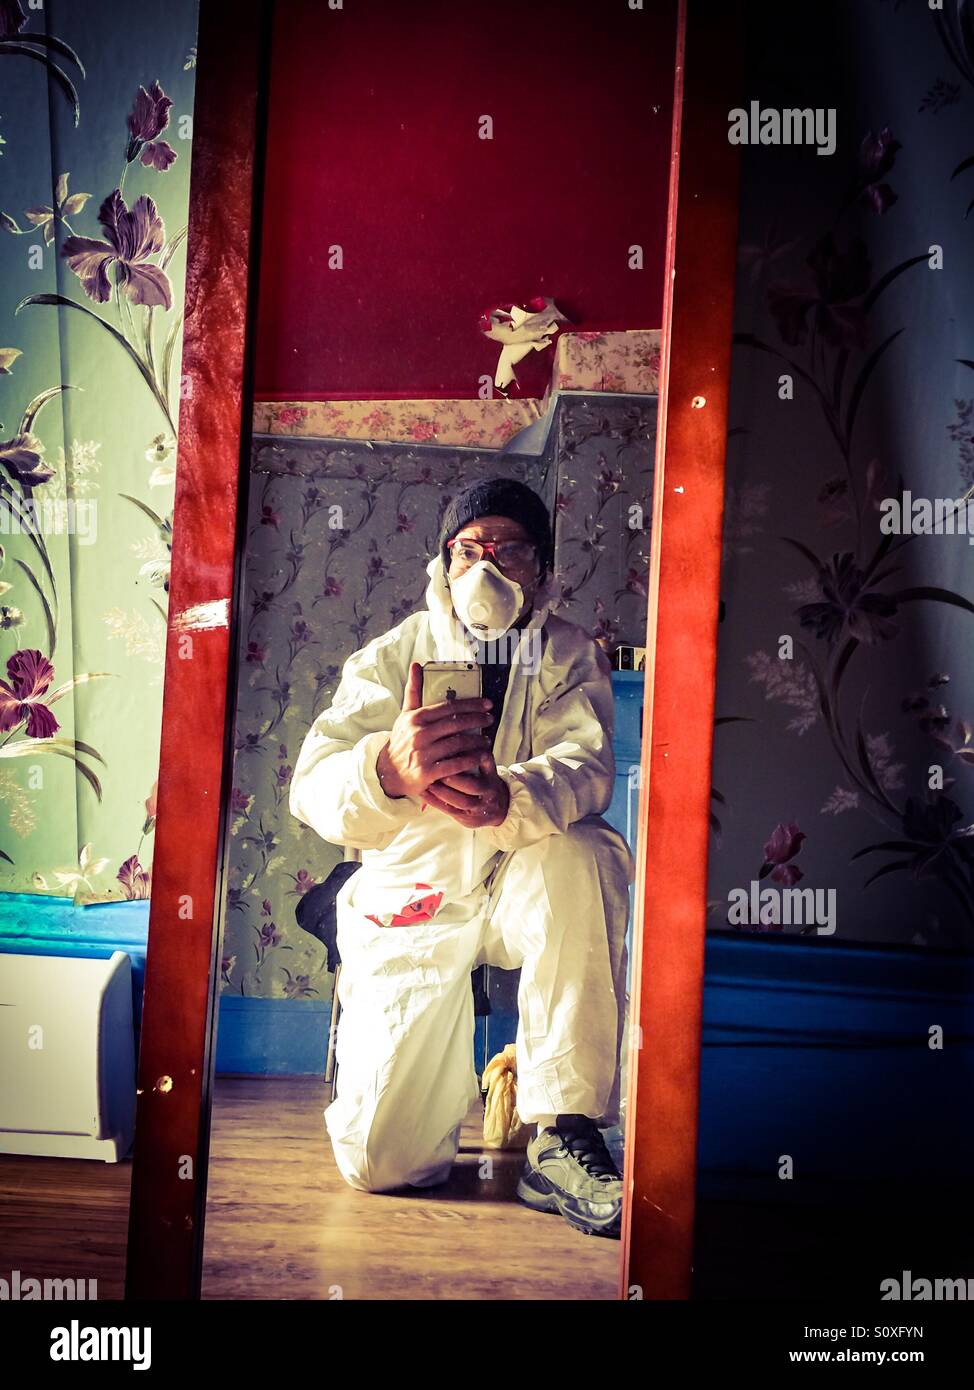 Construction worker selfie. Man in overalls wearing a mask kneels down for a photo of his own. Mirror, mirror. A break in routine. A pause. Indoors. Stock Photo